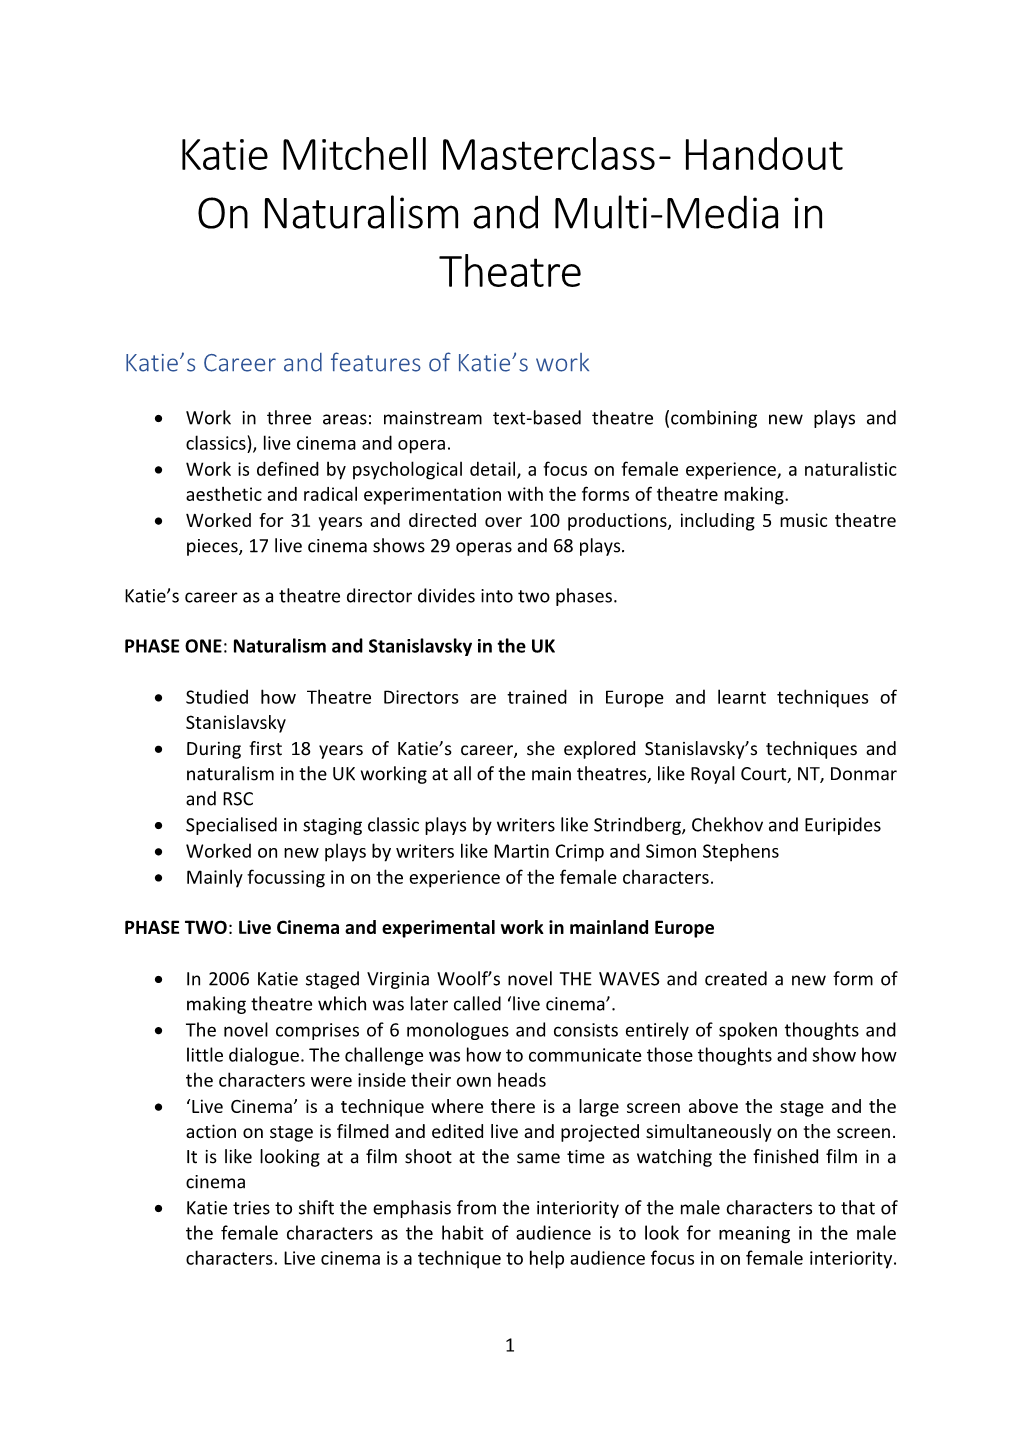 Katie Mitchell Masterclass - Handout on Naturalism and Multi-Media in Theatre